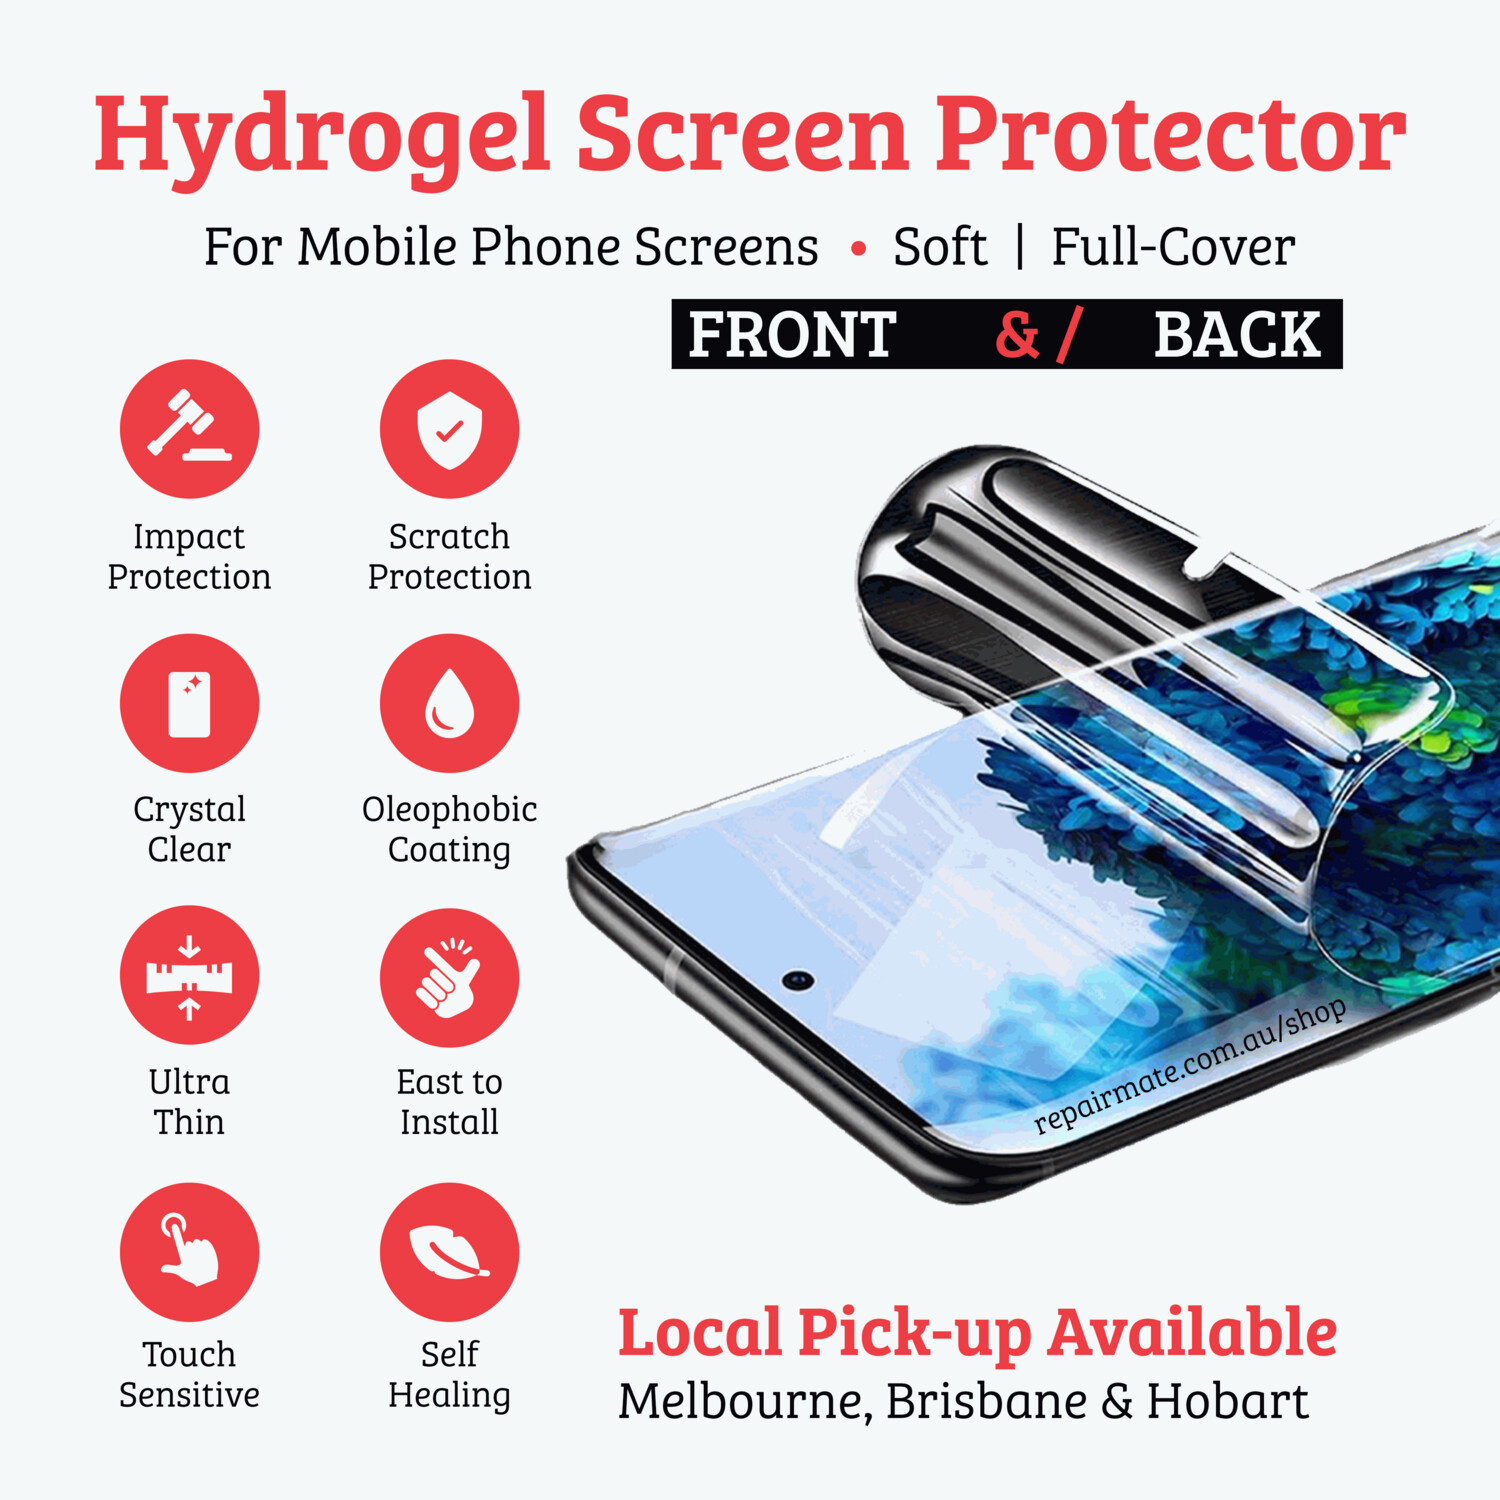 TCL 10 Pro Premium Hydrogel Screen Protector [2 Pack]